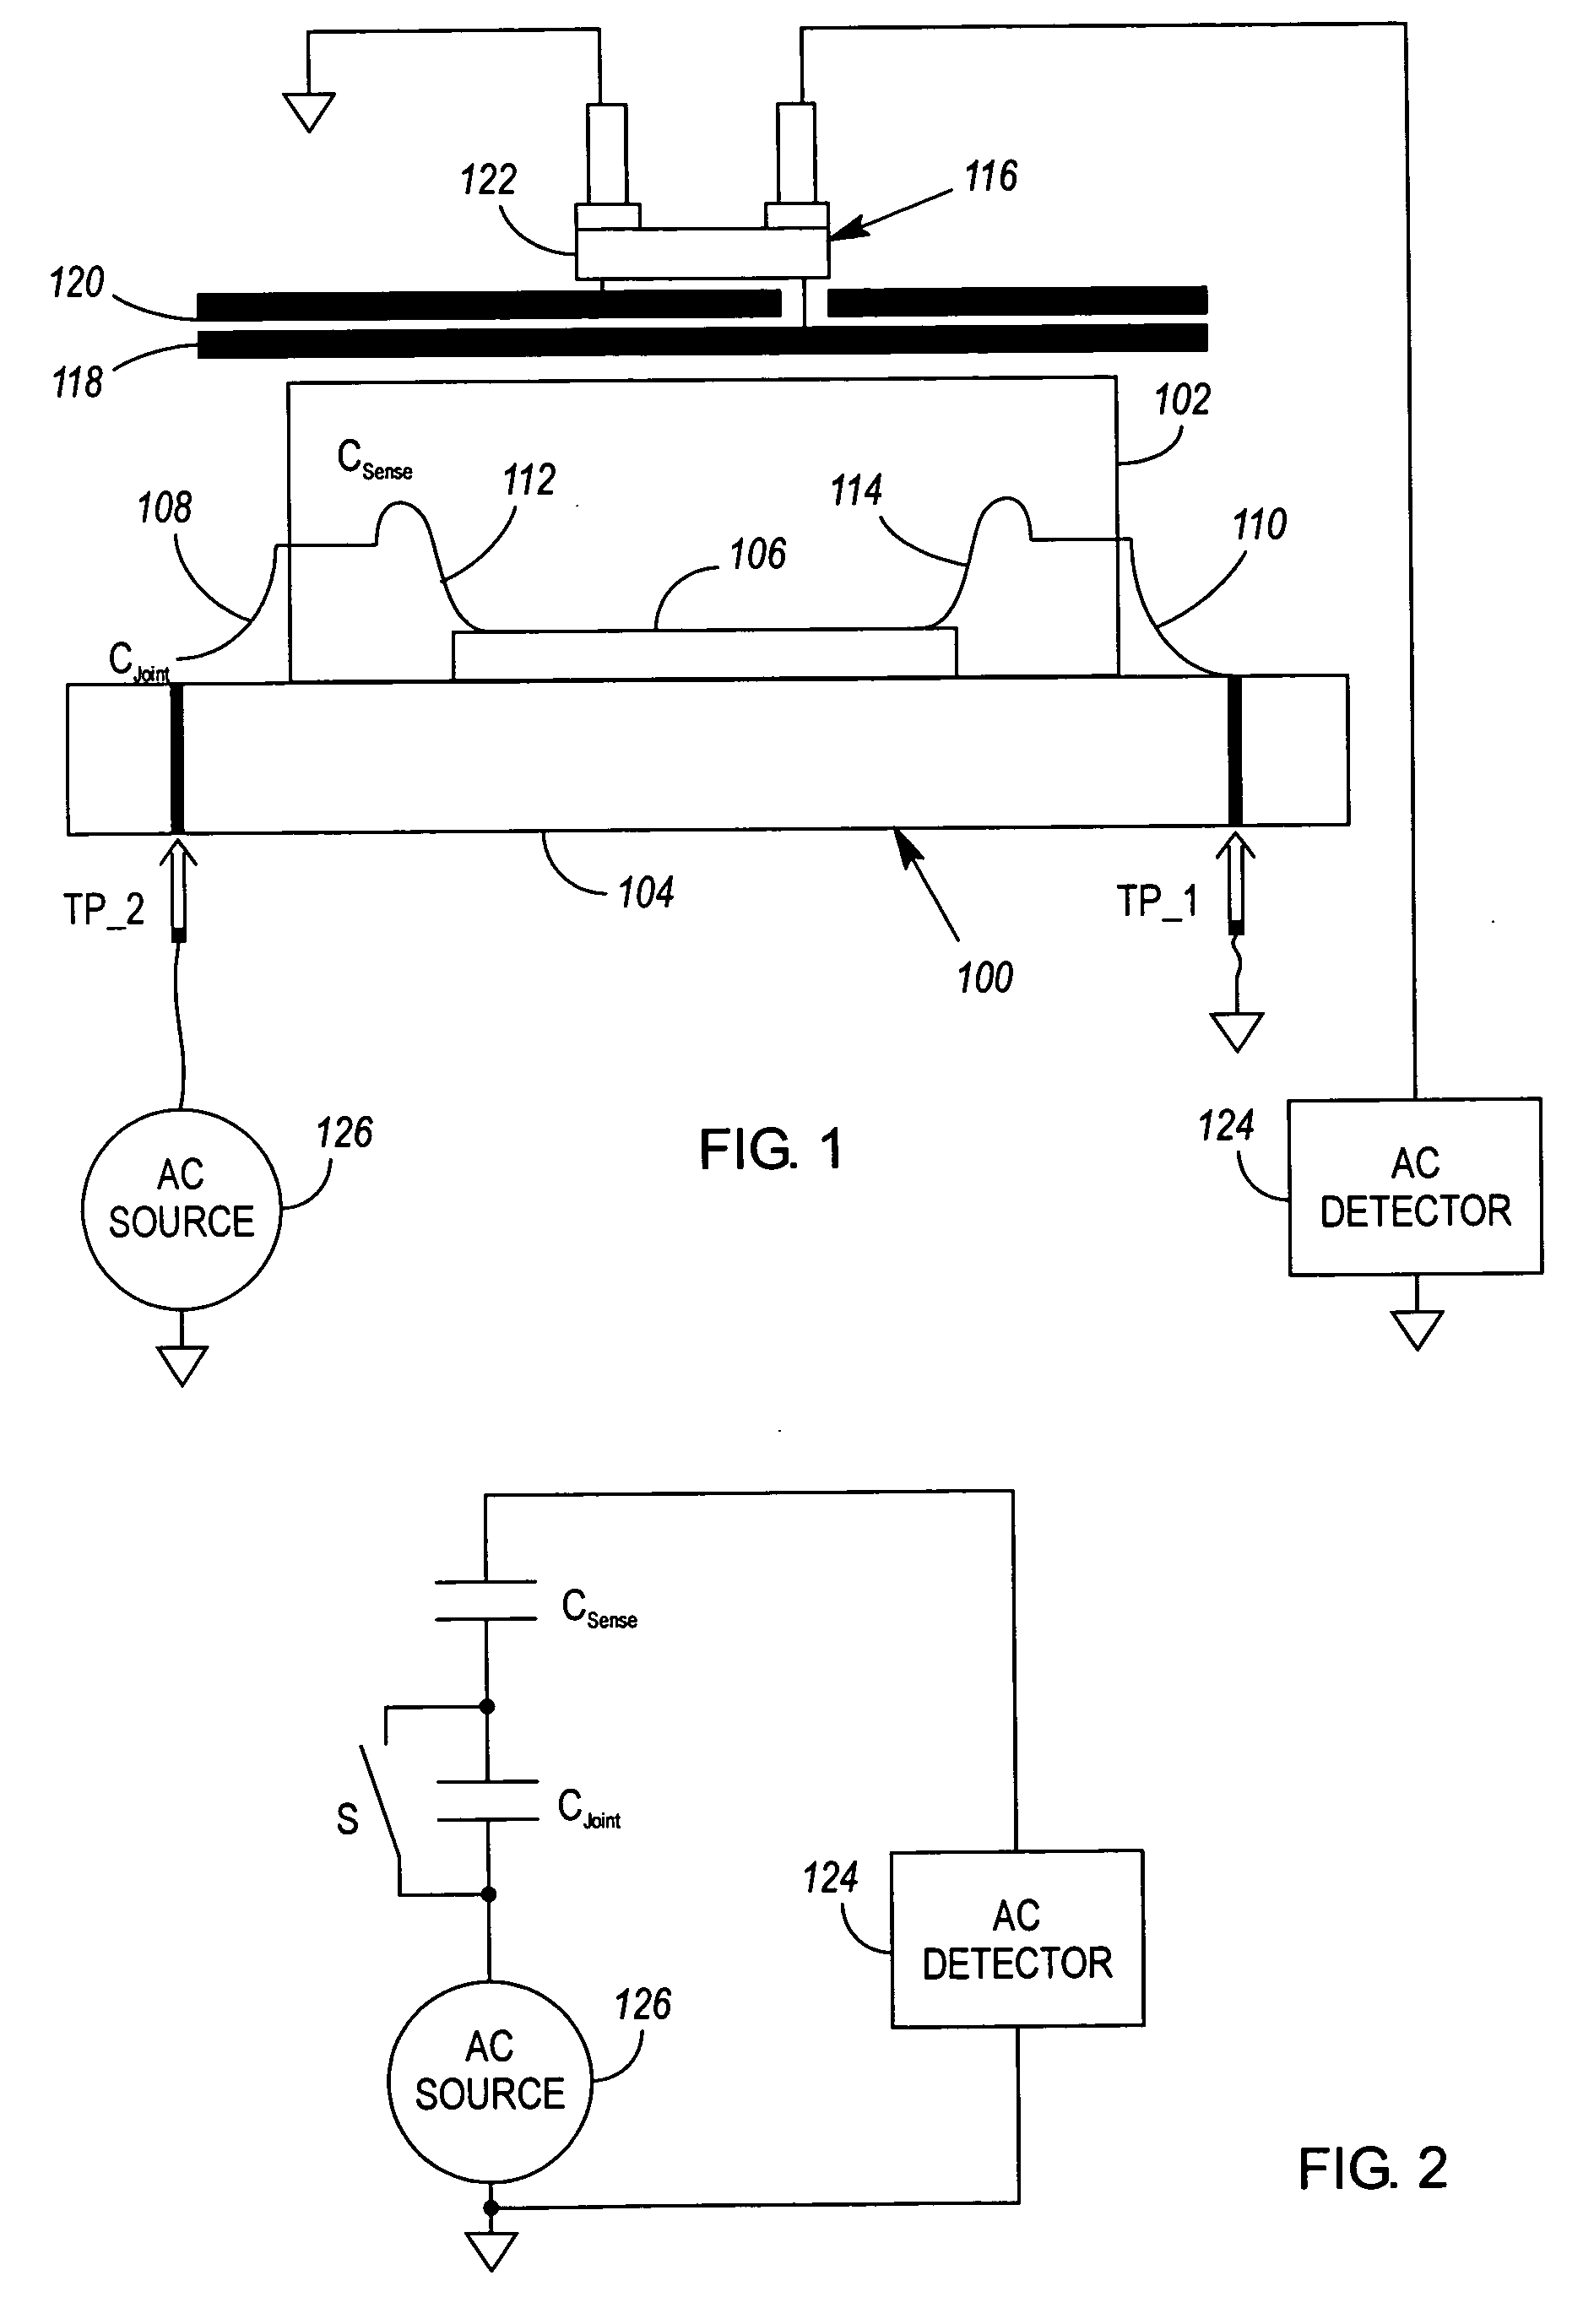 Methods and apparatus for testing continuity of electrical paths through connectors of circuit assemblies